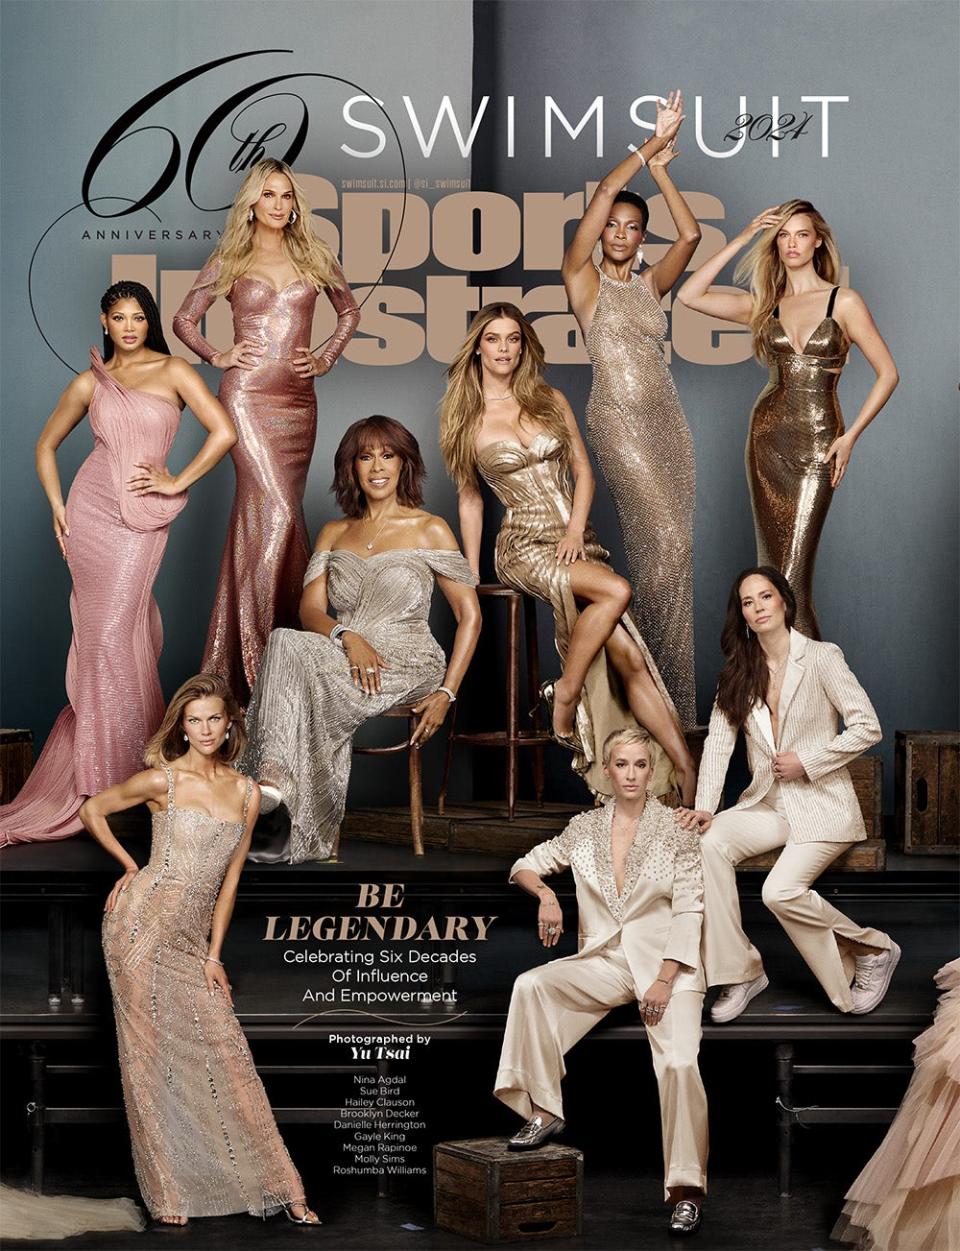 A group of SI Swimsuit models posing together for the 60th anniversary issue